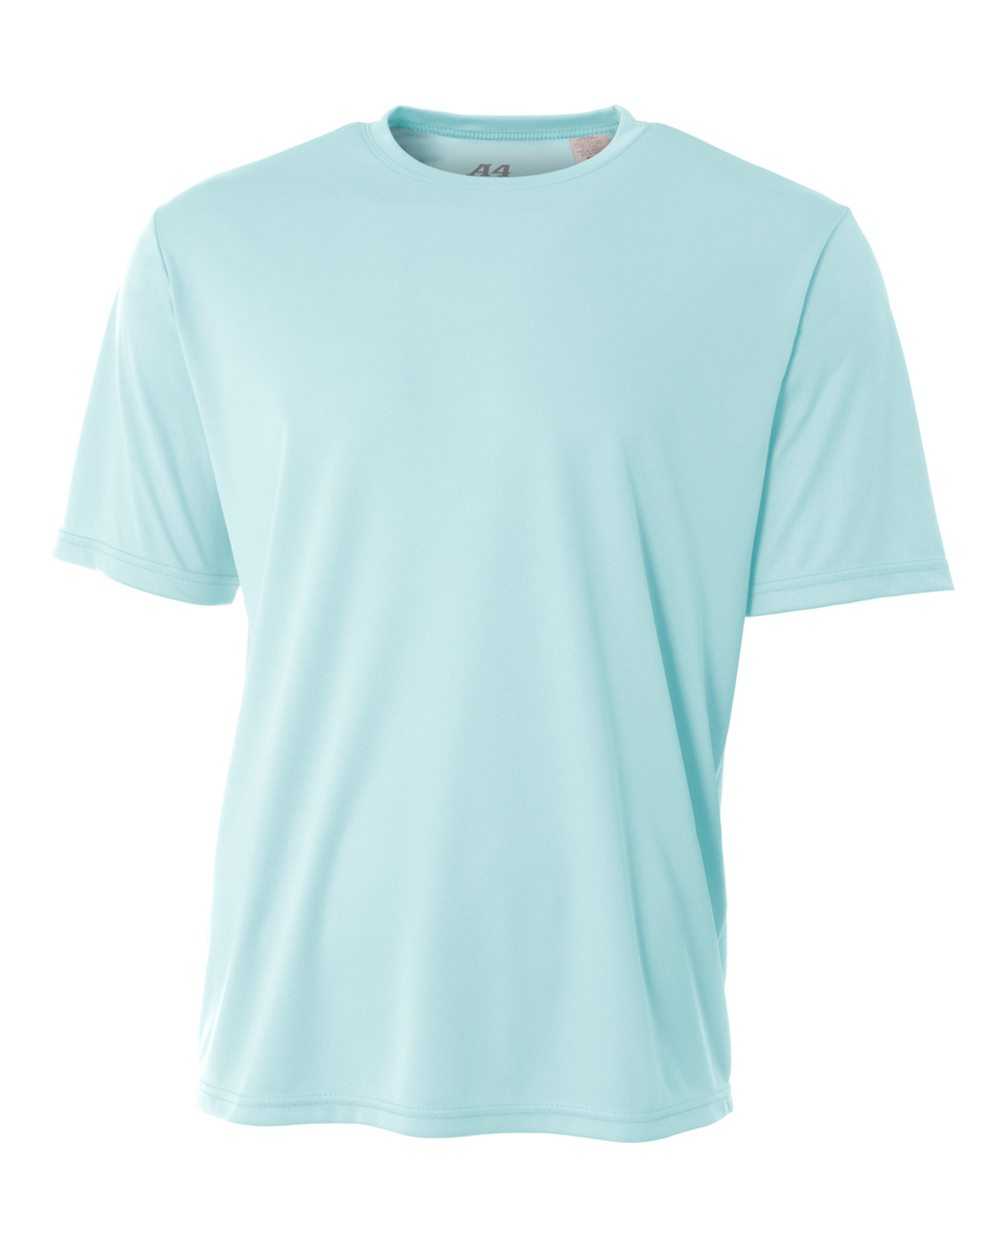 A4 N3142 Cooling Performance Crew - Pastel Blue - HIT a Double